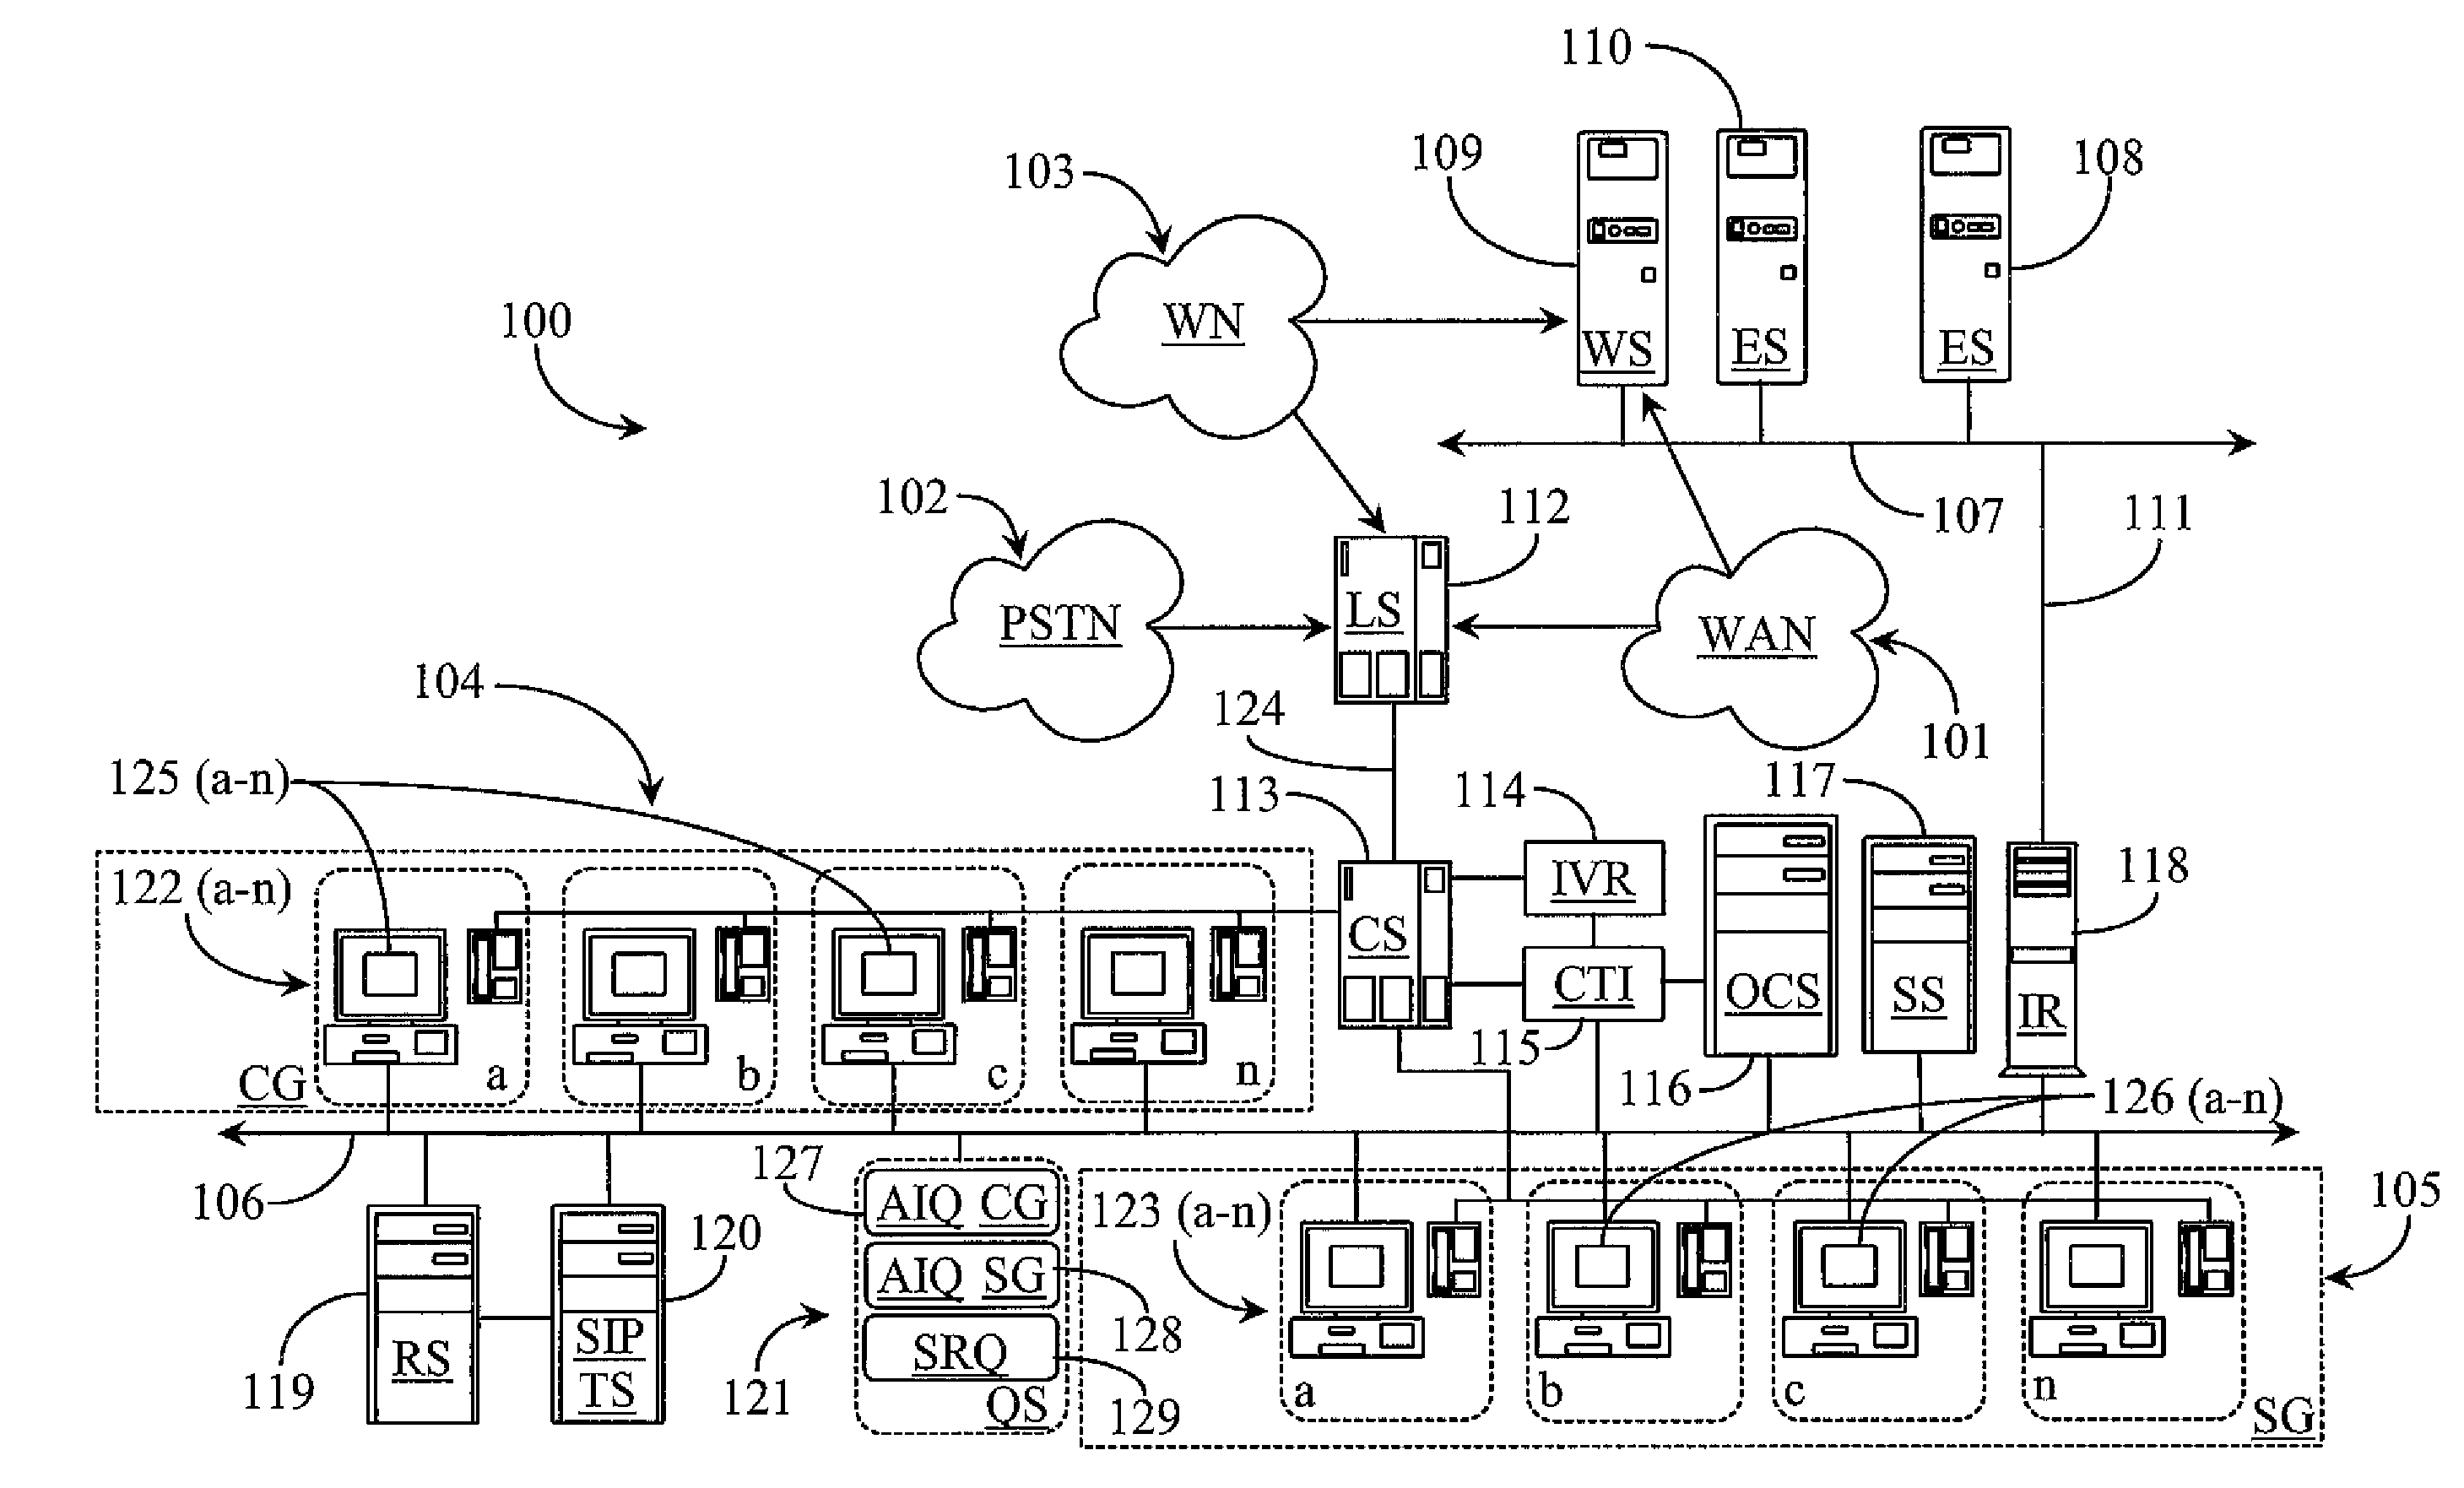 Multimedia Routing System for Securing Third Party Participation in Call Consultation or Call Transfer of a Call in Progress